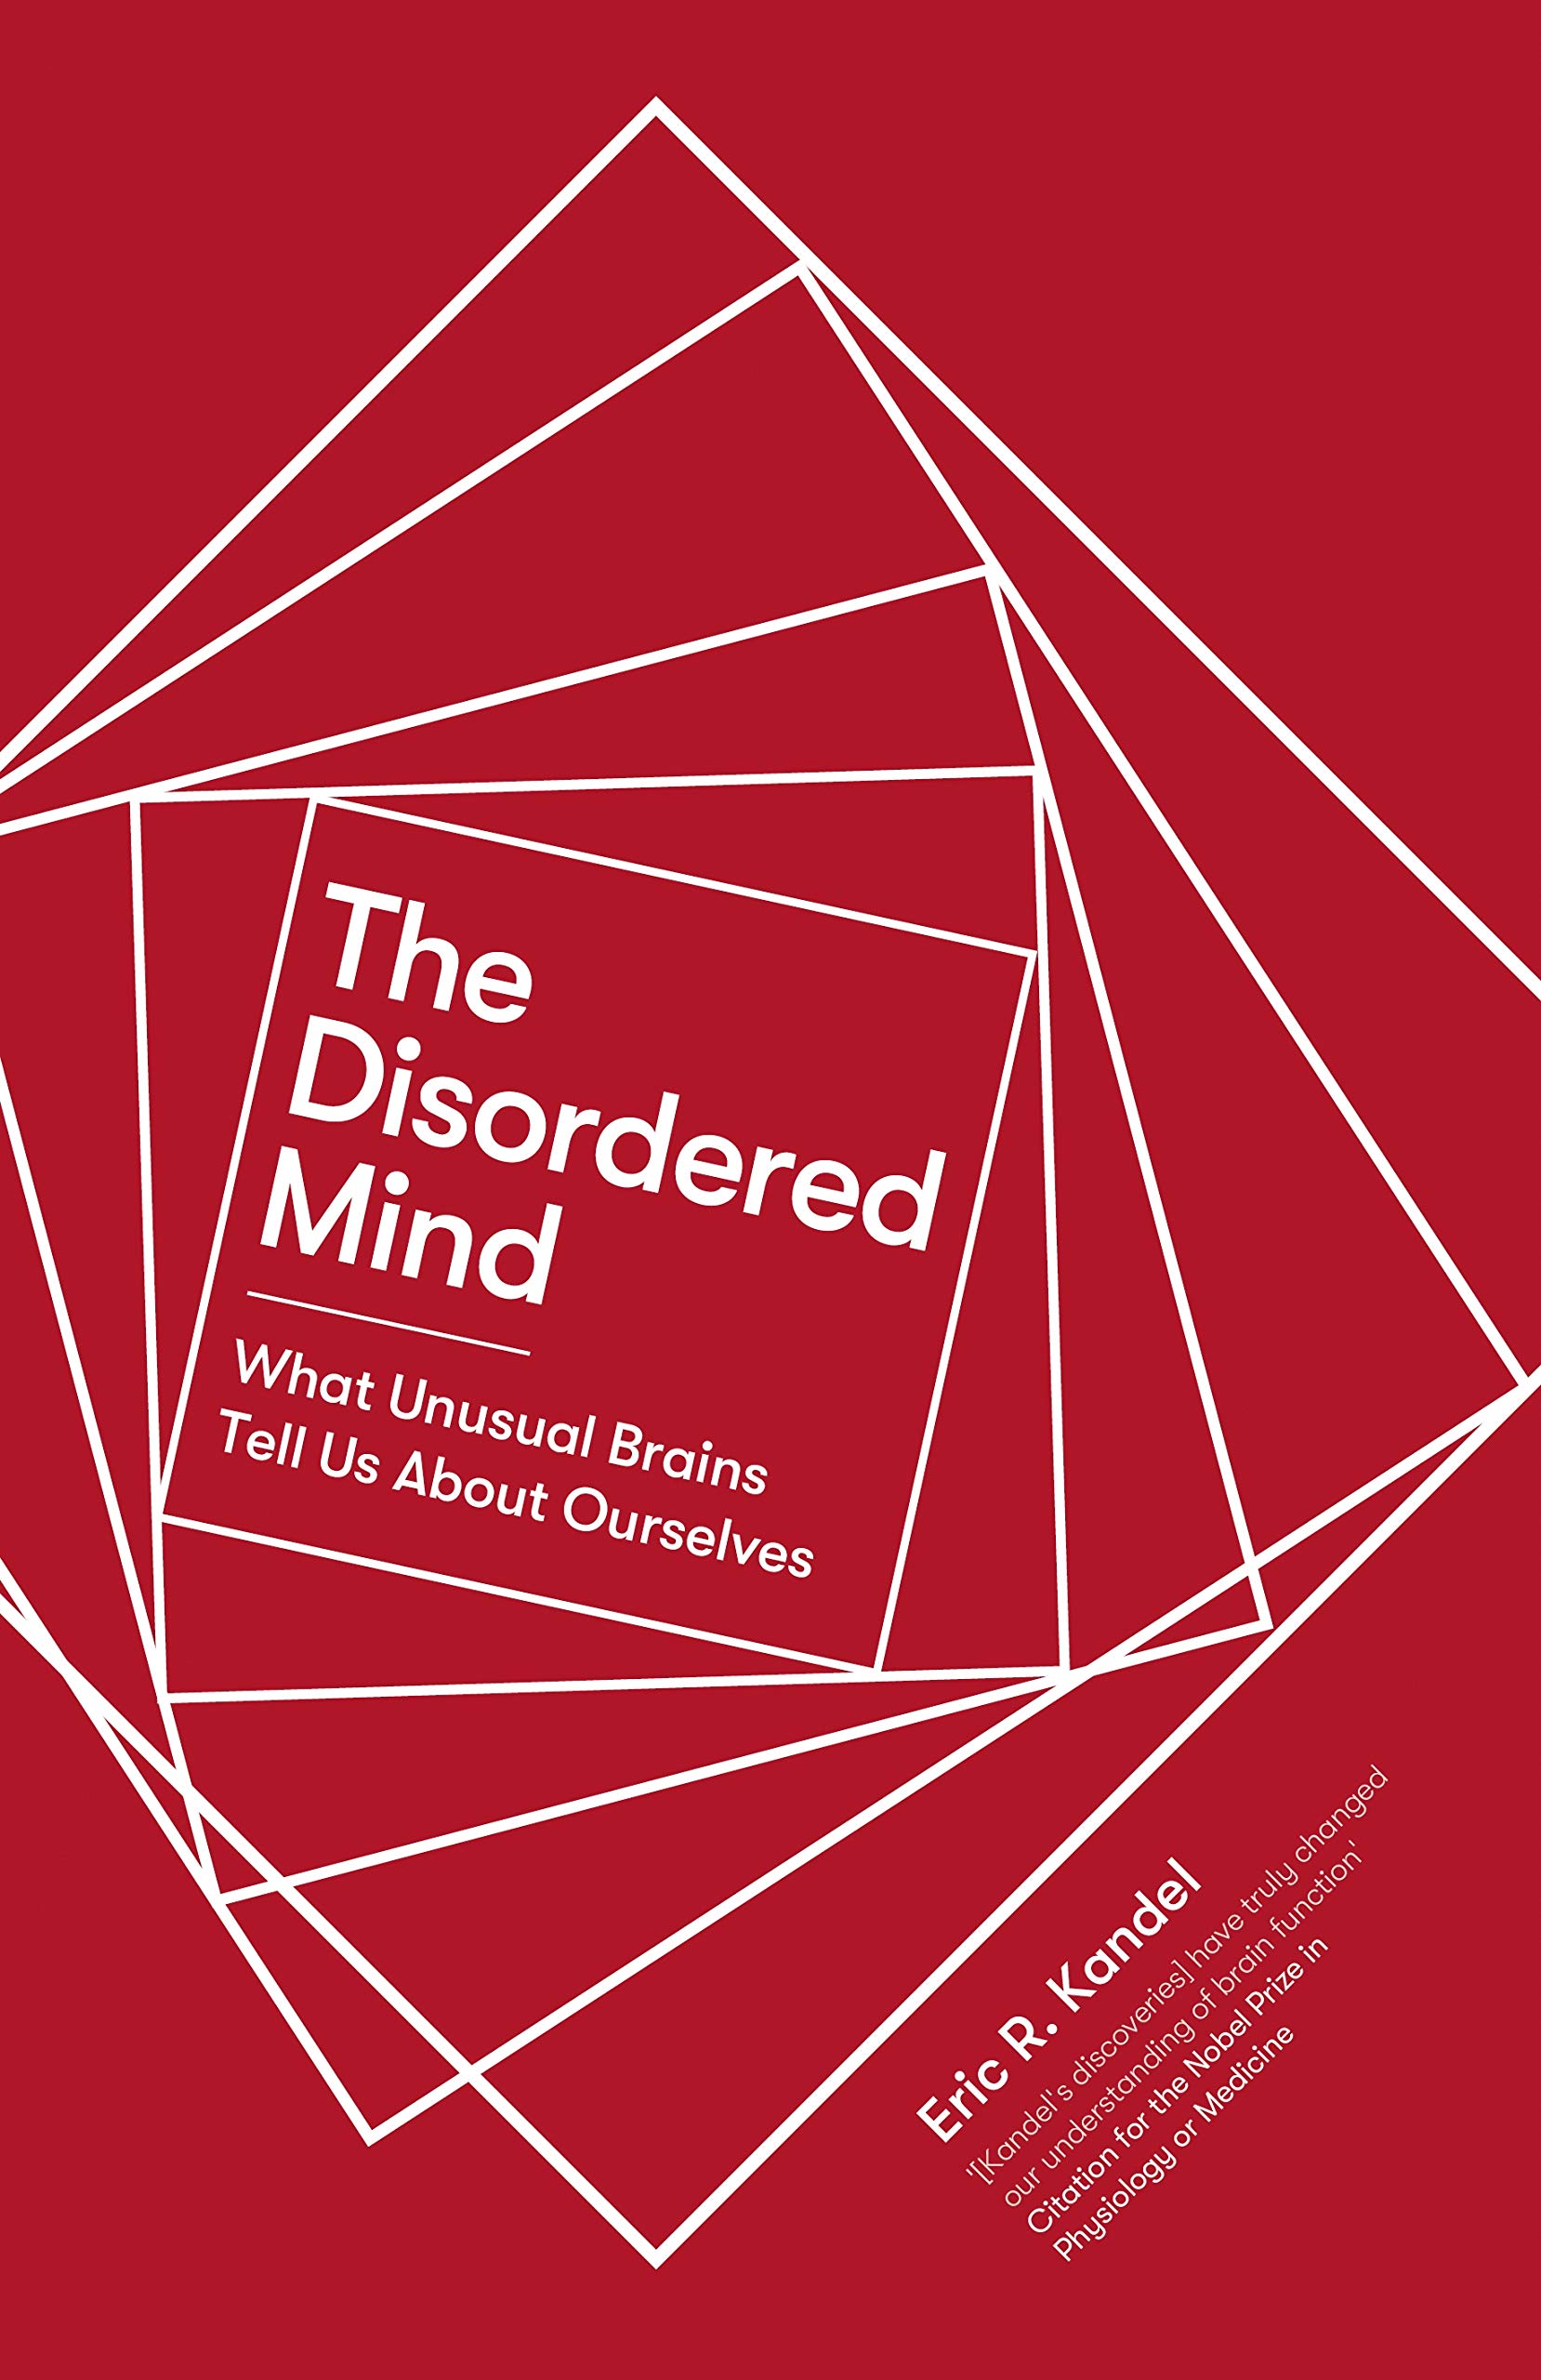 The Disordered Mind | Eric R. Kandel